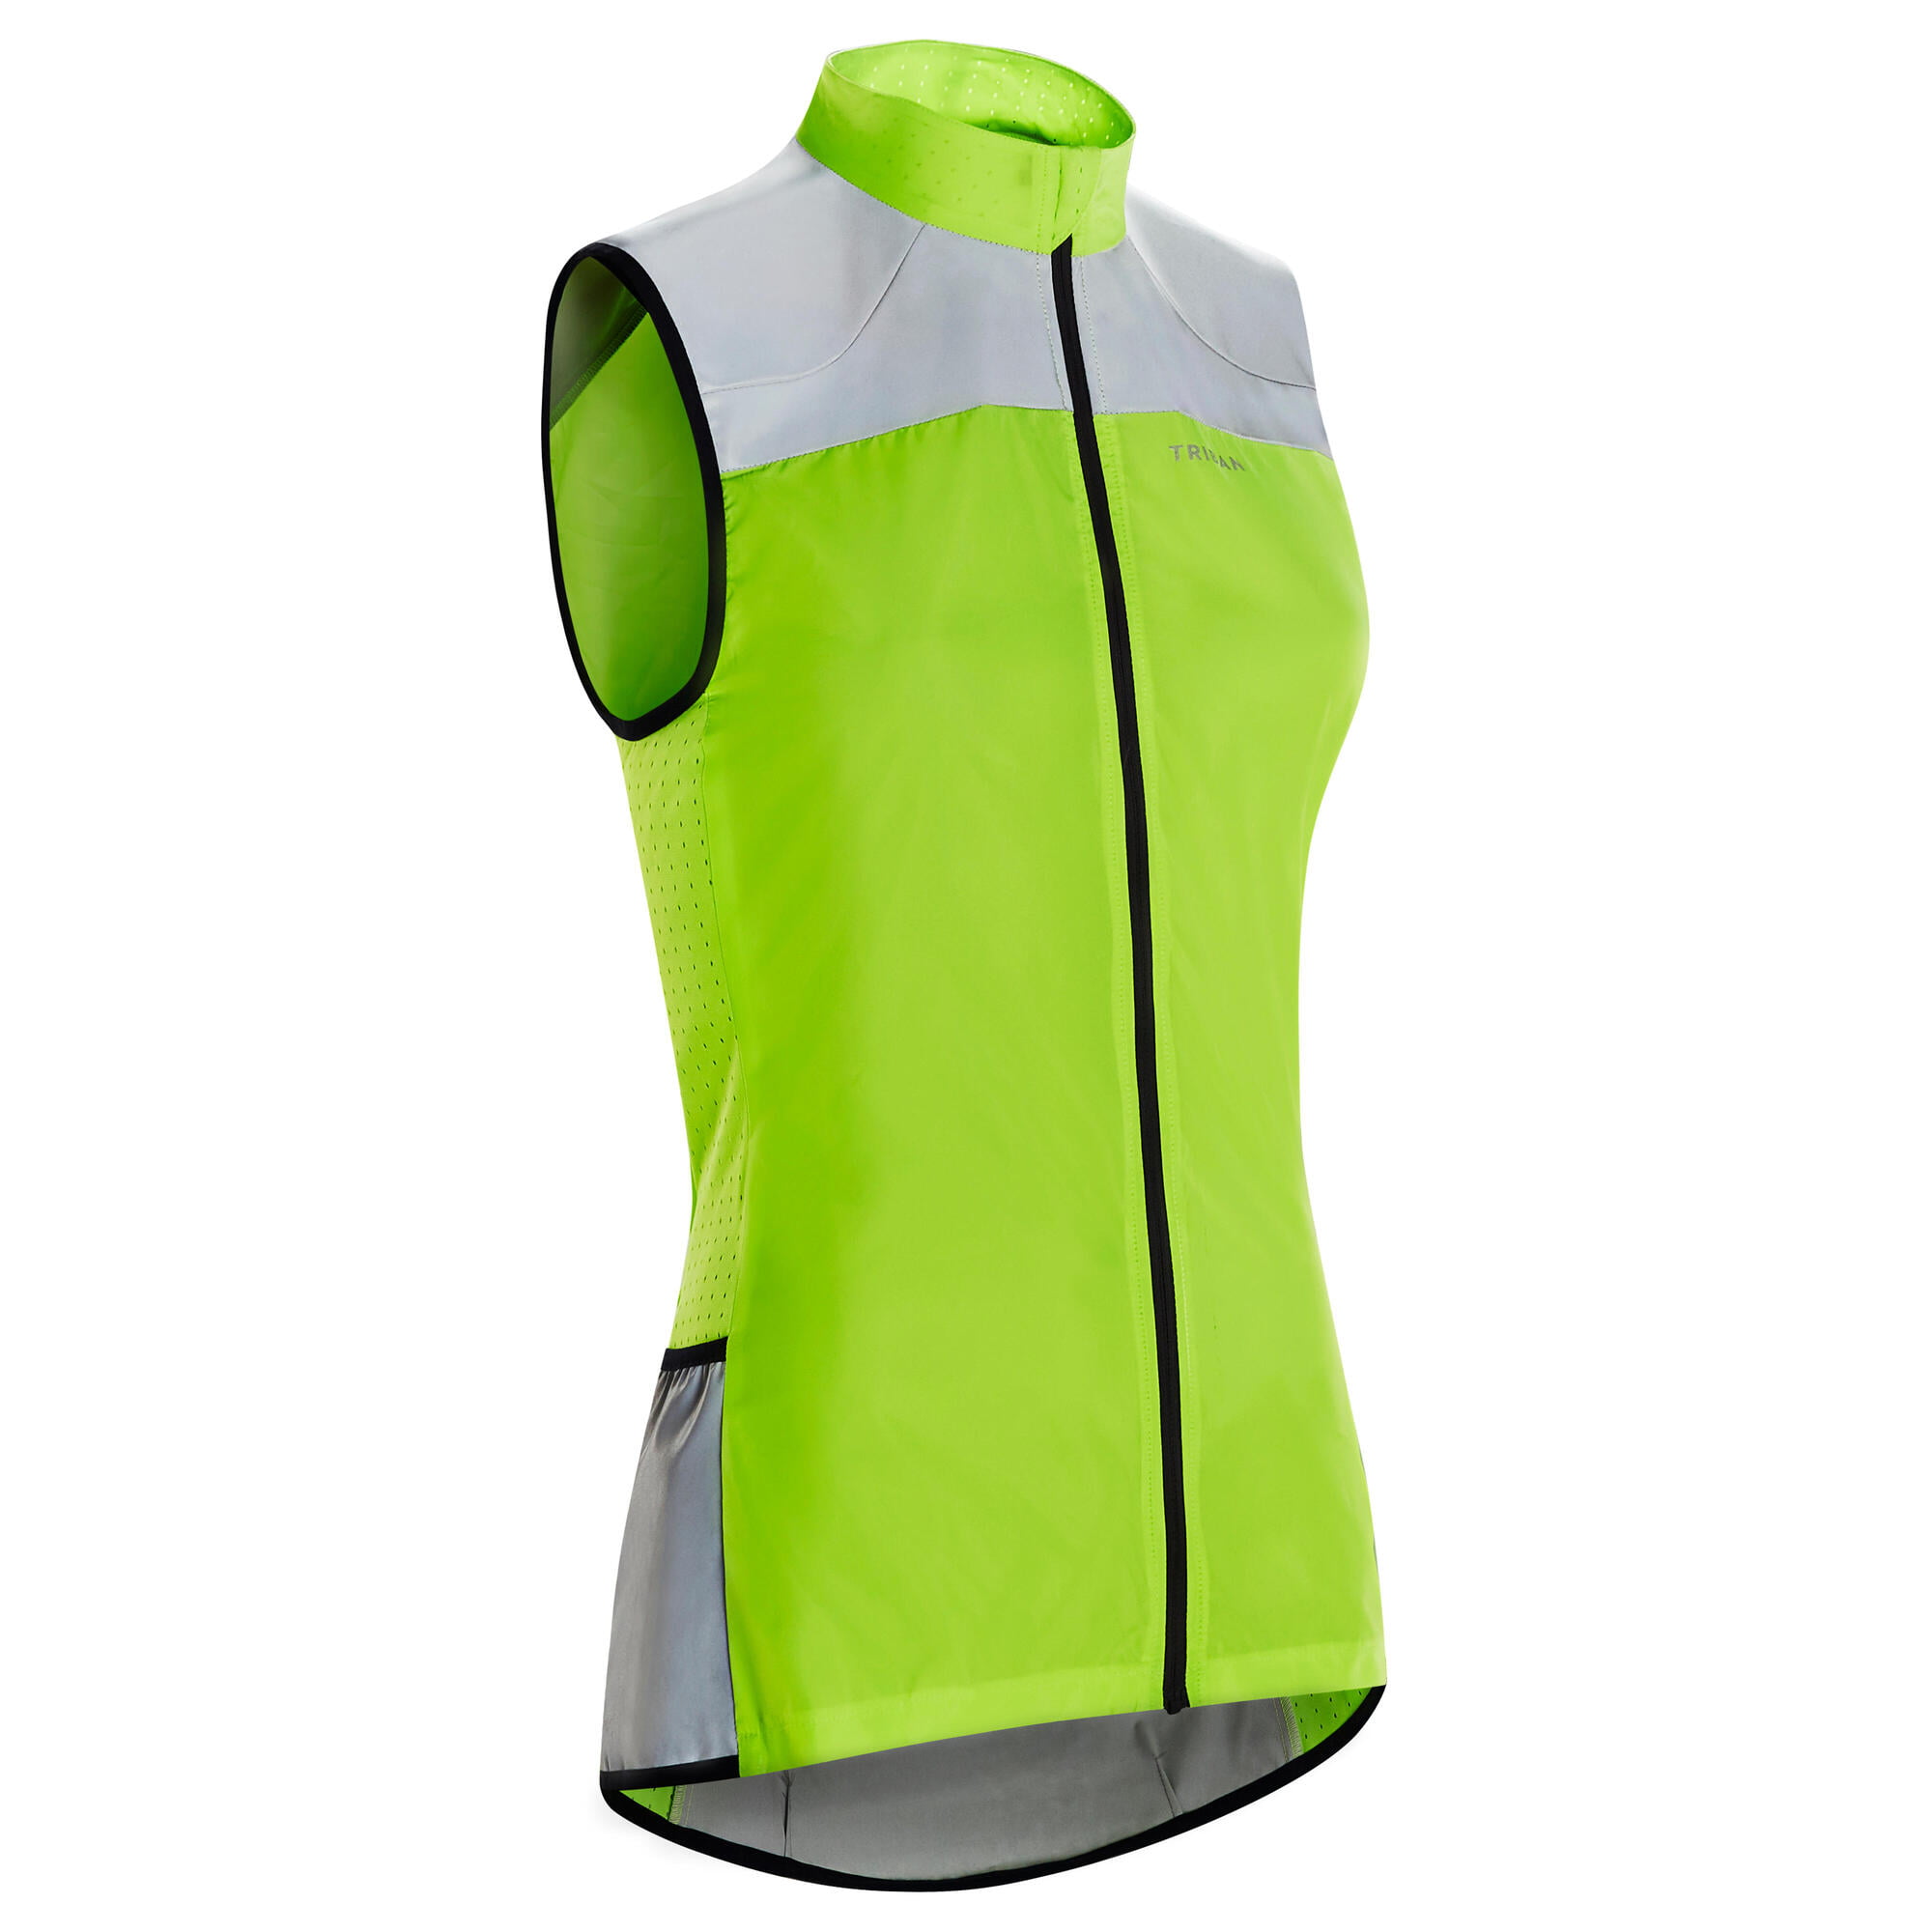 Very high visibility sleeveless jacket vest gilet w SAFETY YELLOW CYCLING VEST 